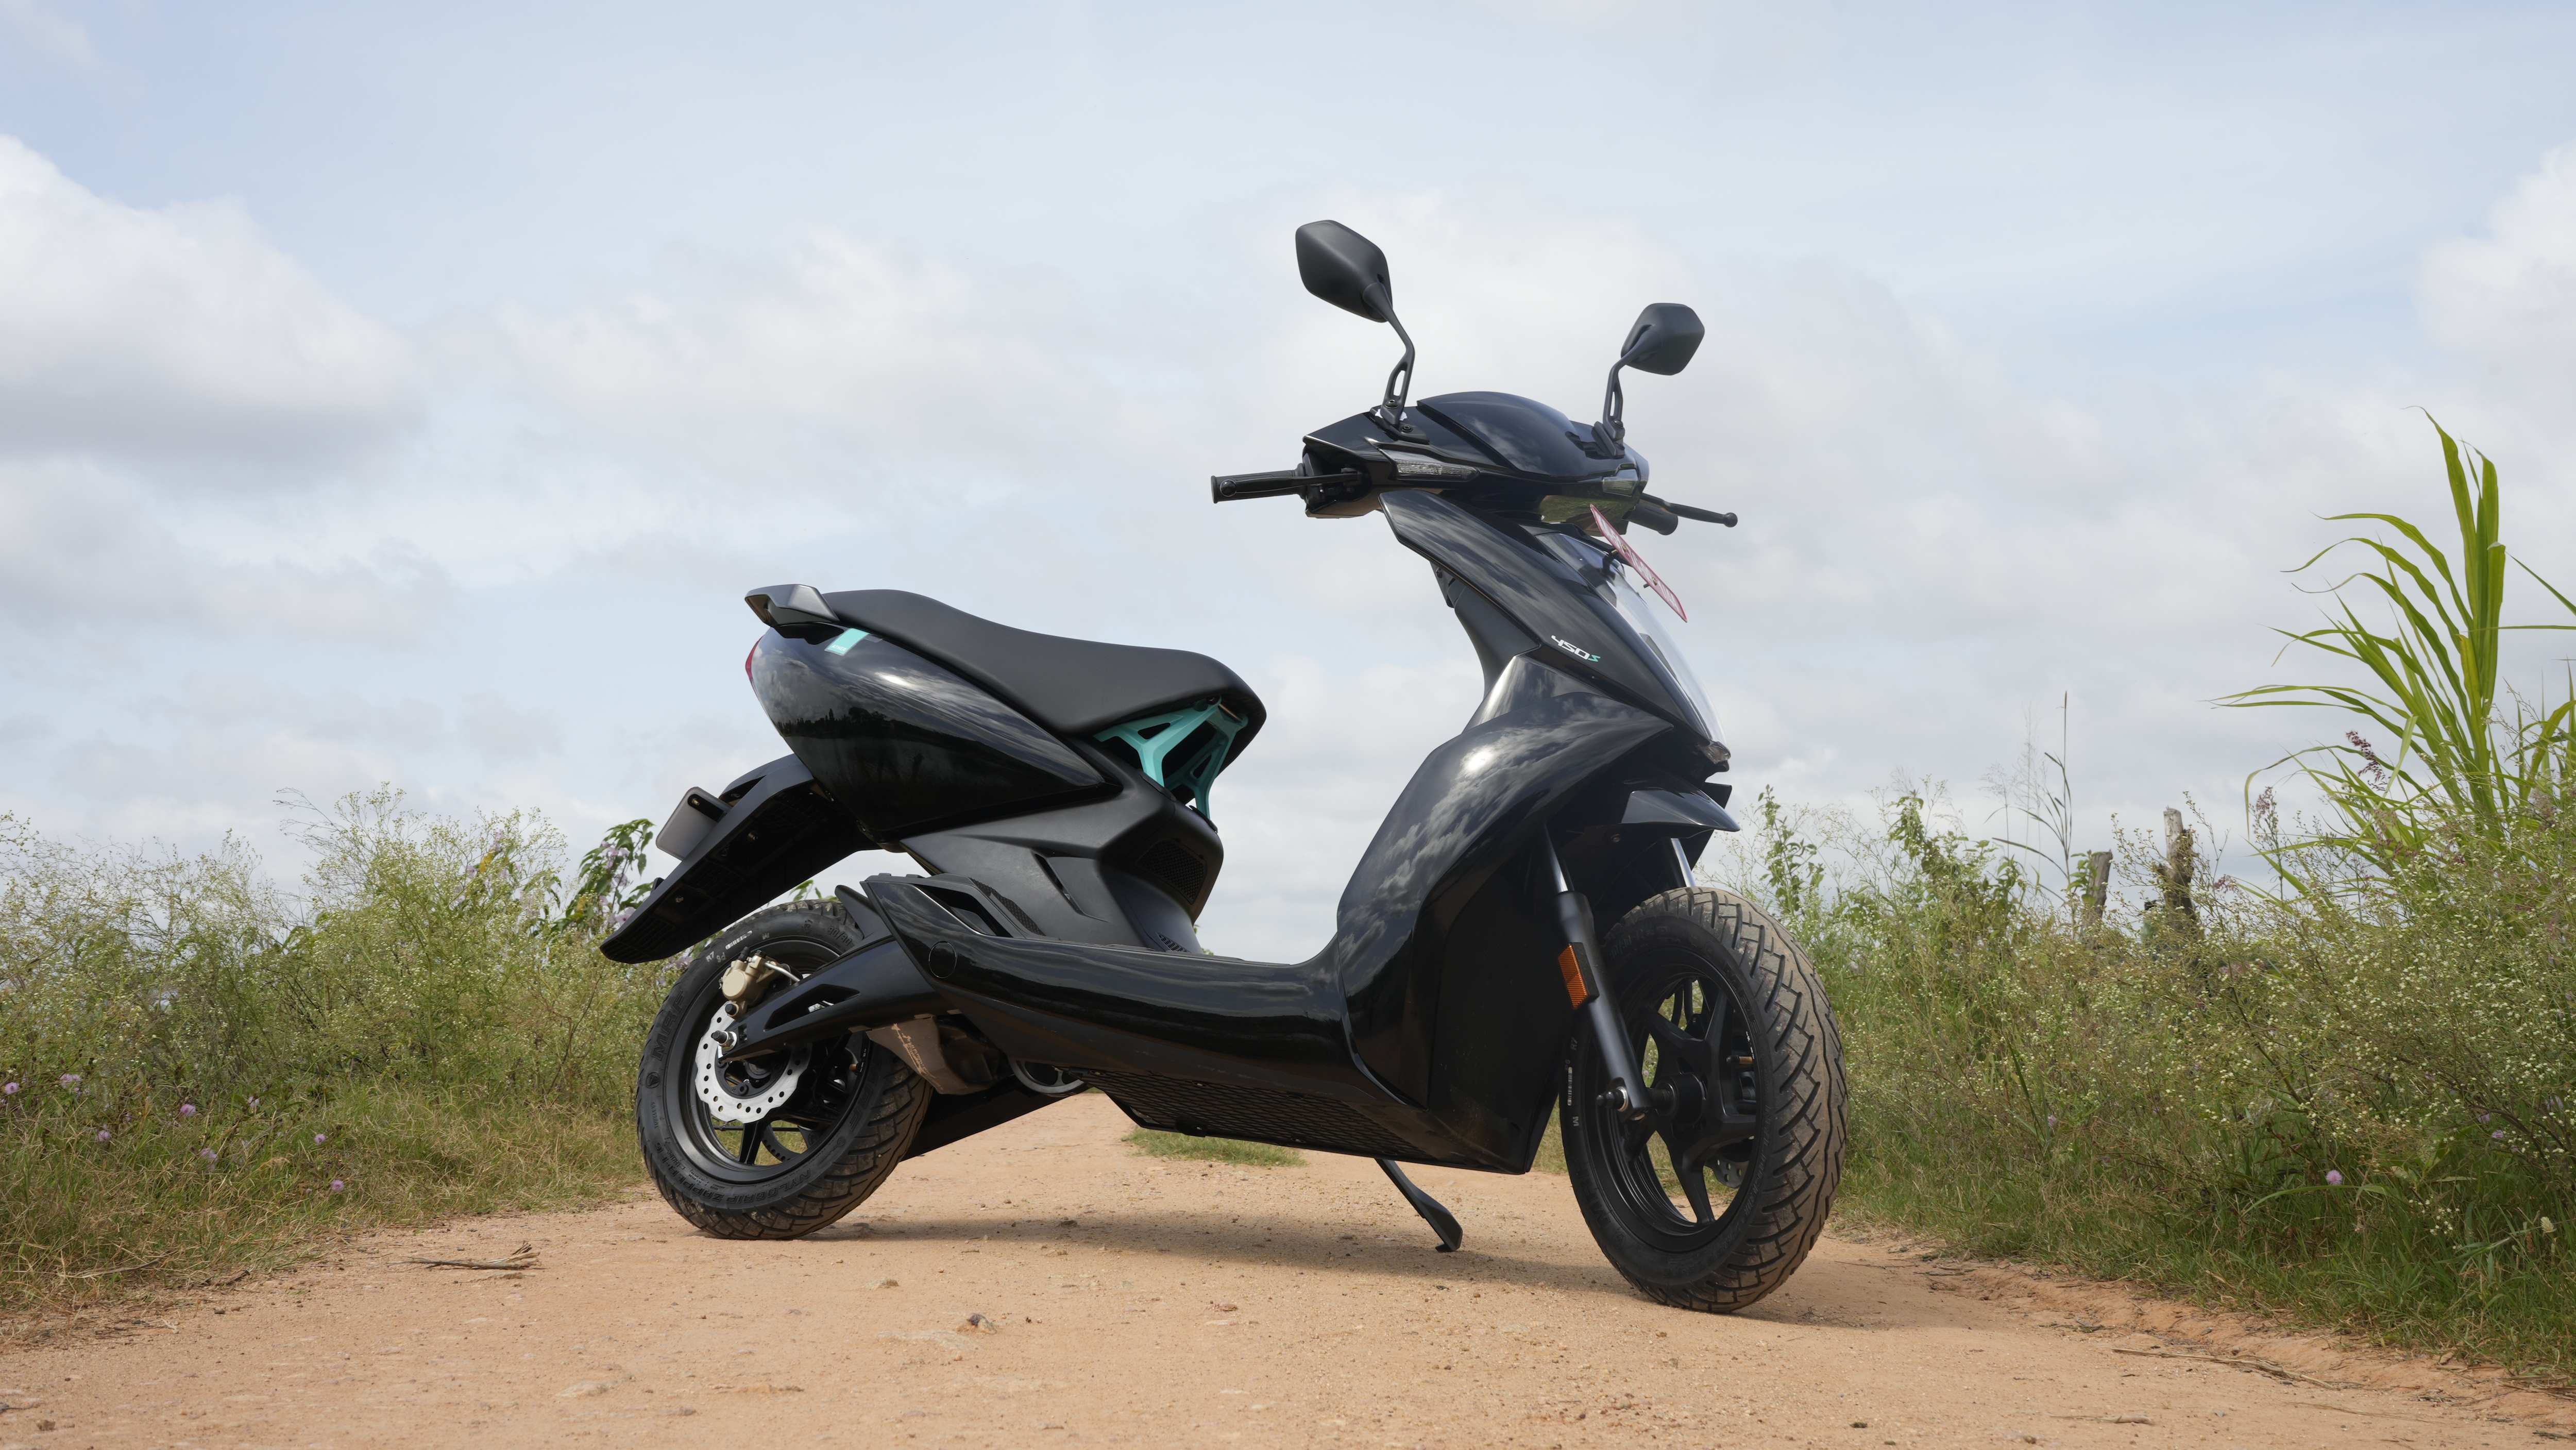 Ather 450S comes visually the same as the brand's flagship 450X electric scooter.